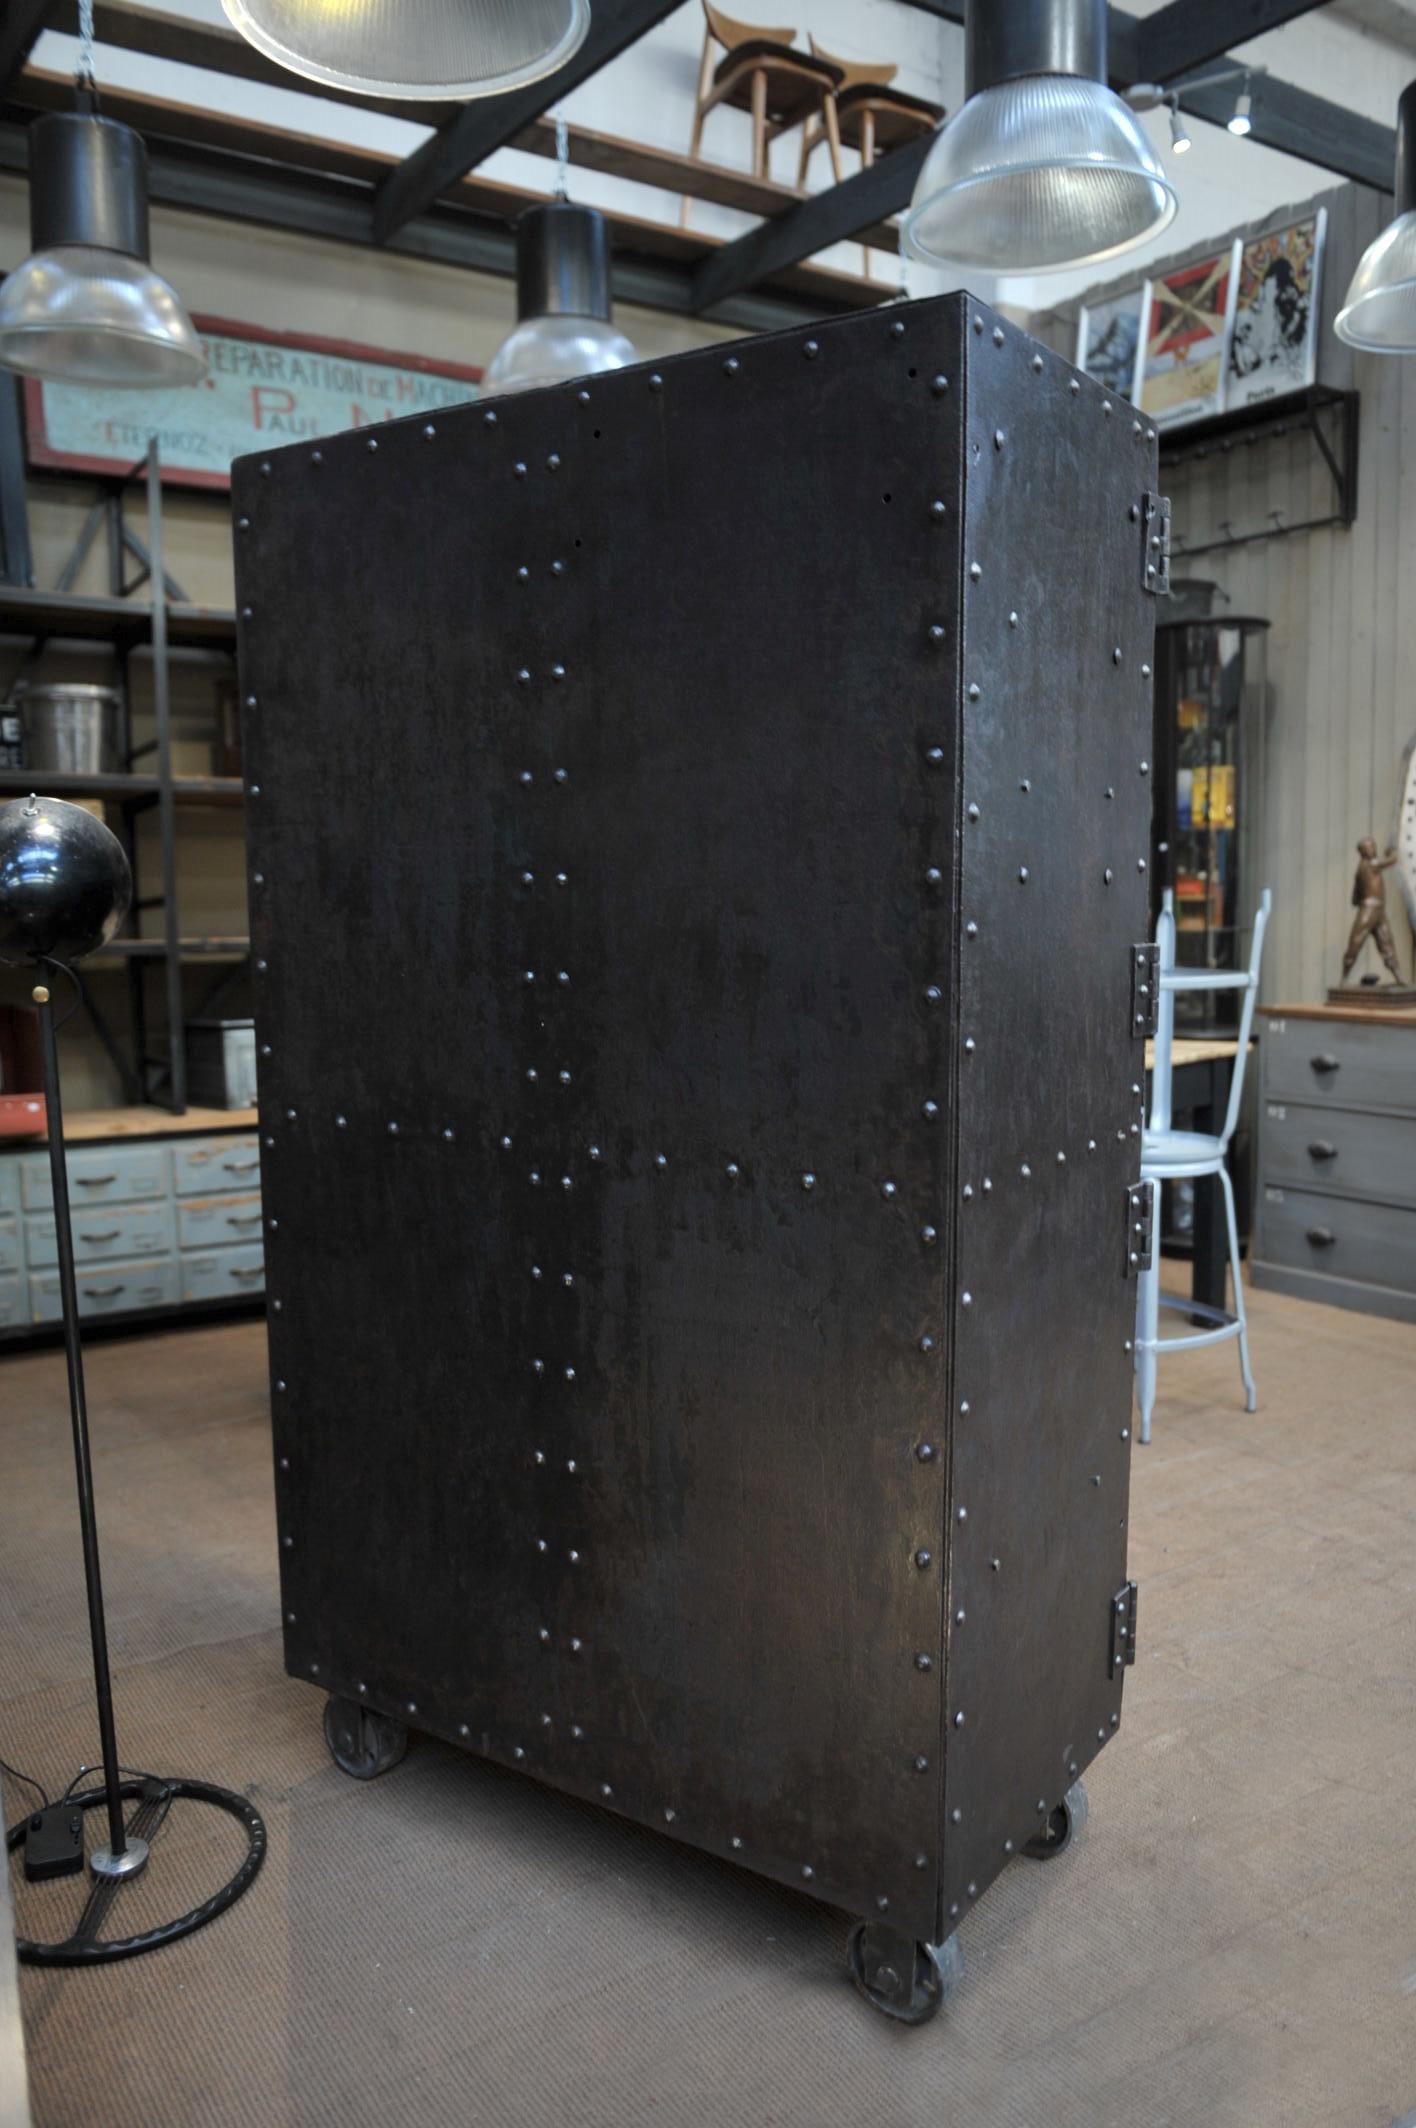 Exceptional Four-Doors Industrial Riveted Iron Cabinet on Wheels, circa 1900 (Eisen)